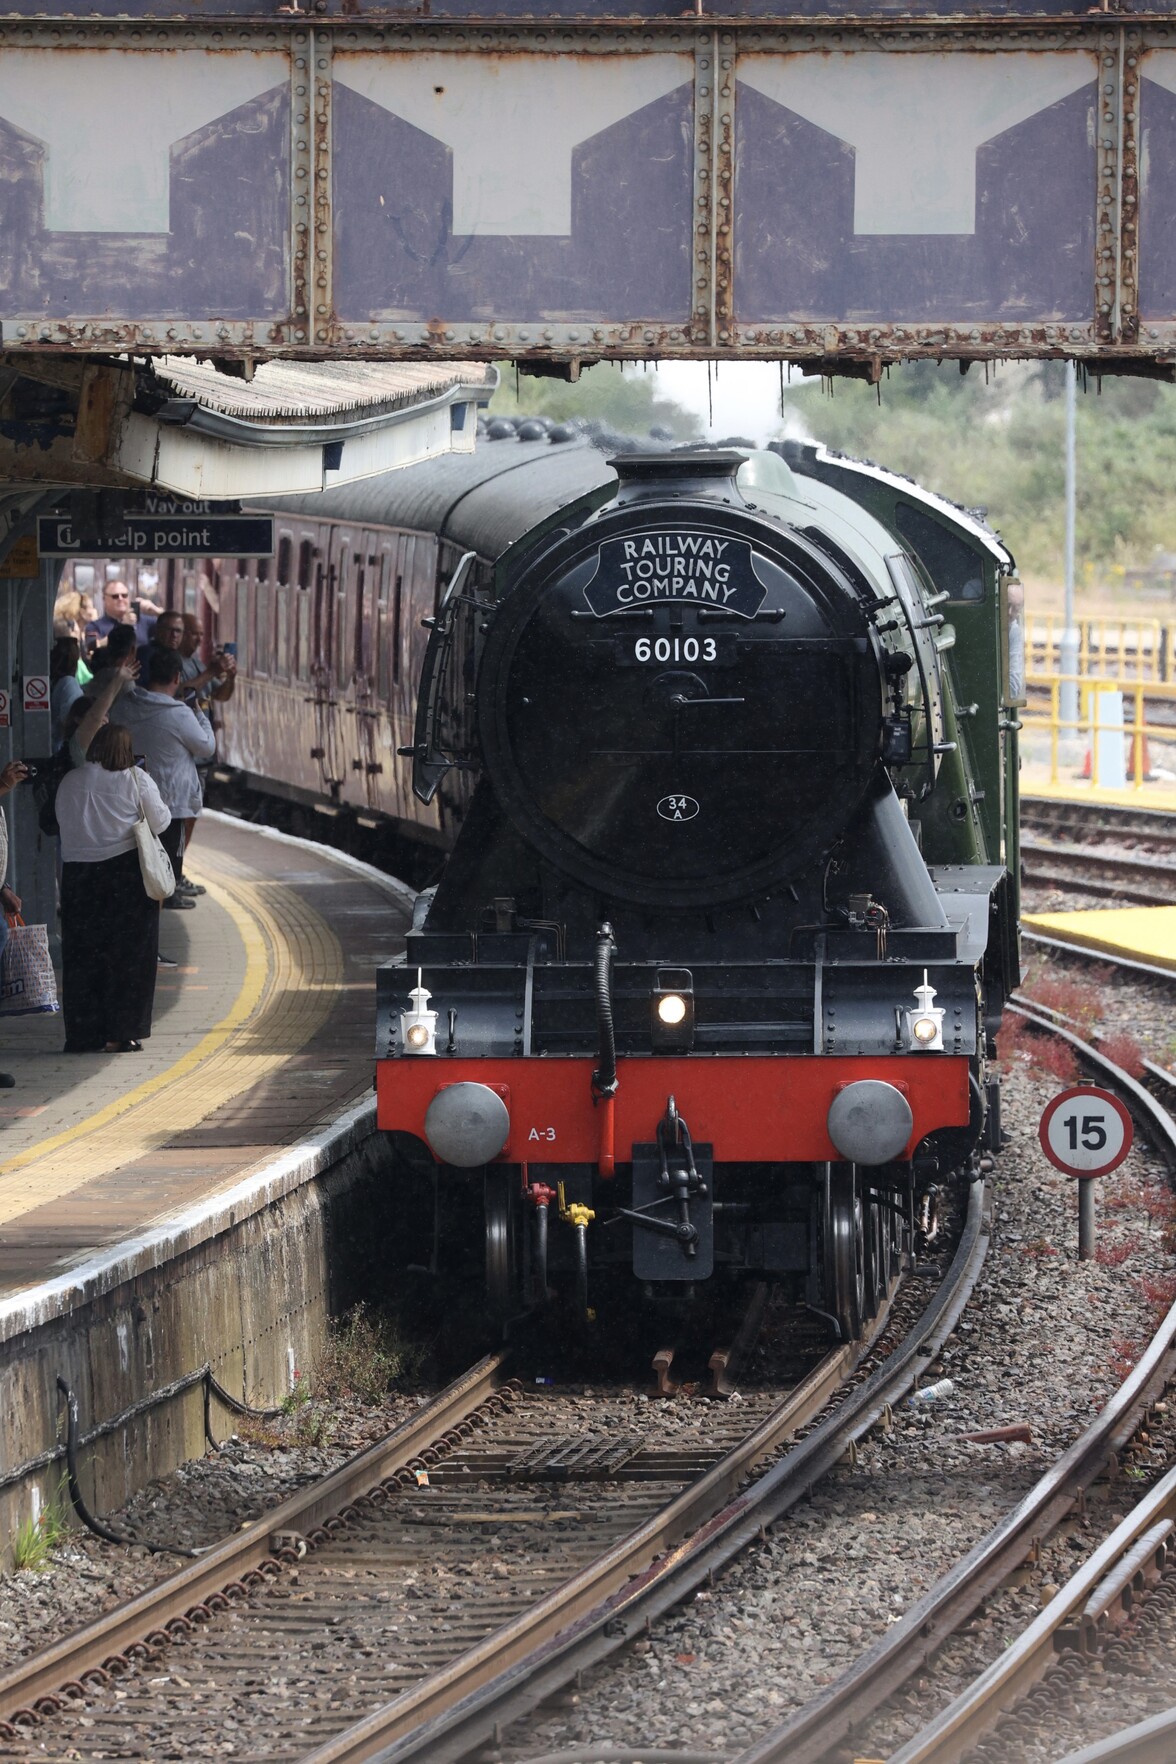 The front end of the Flying Scotsman at a train station. The Flying Scotsman is in dark green and black liver with a red front buffer block. To the right of the train there is a speed limit sign saying “15”. The platform has several people looking at and taking pictures of the train 